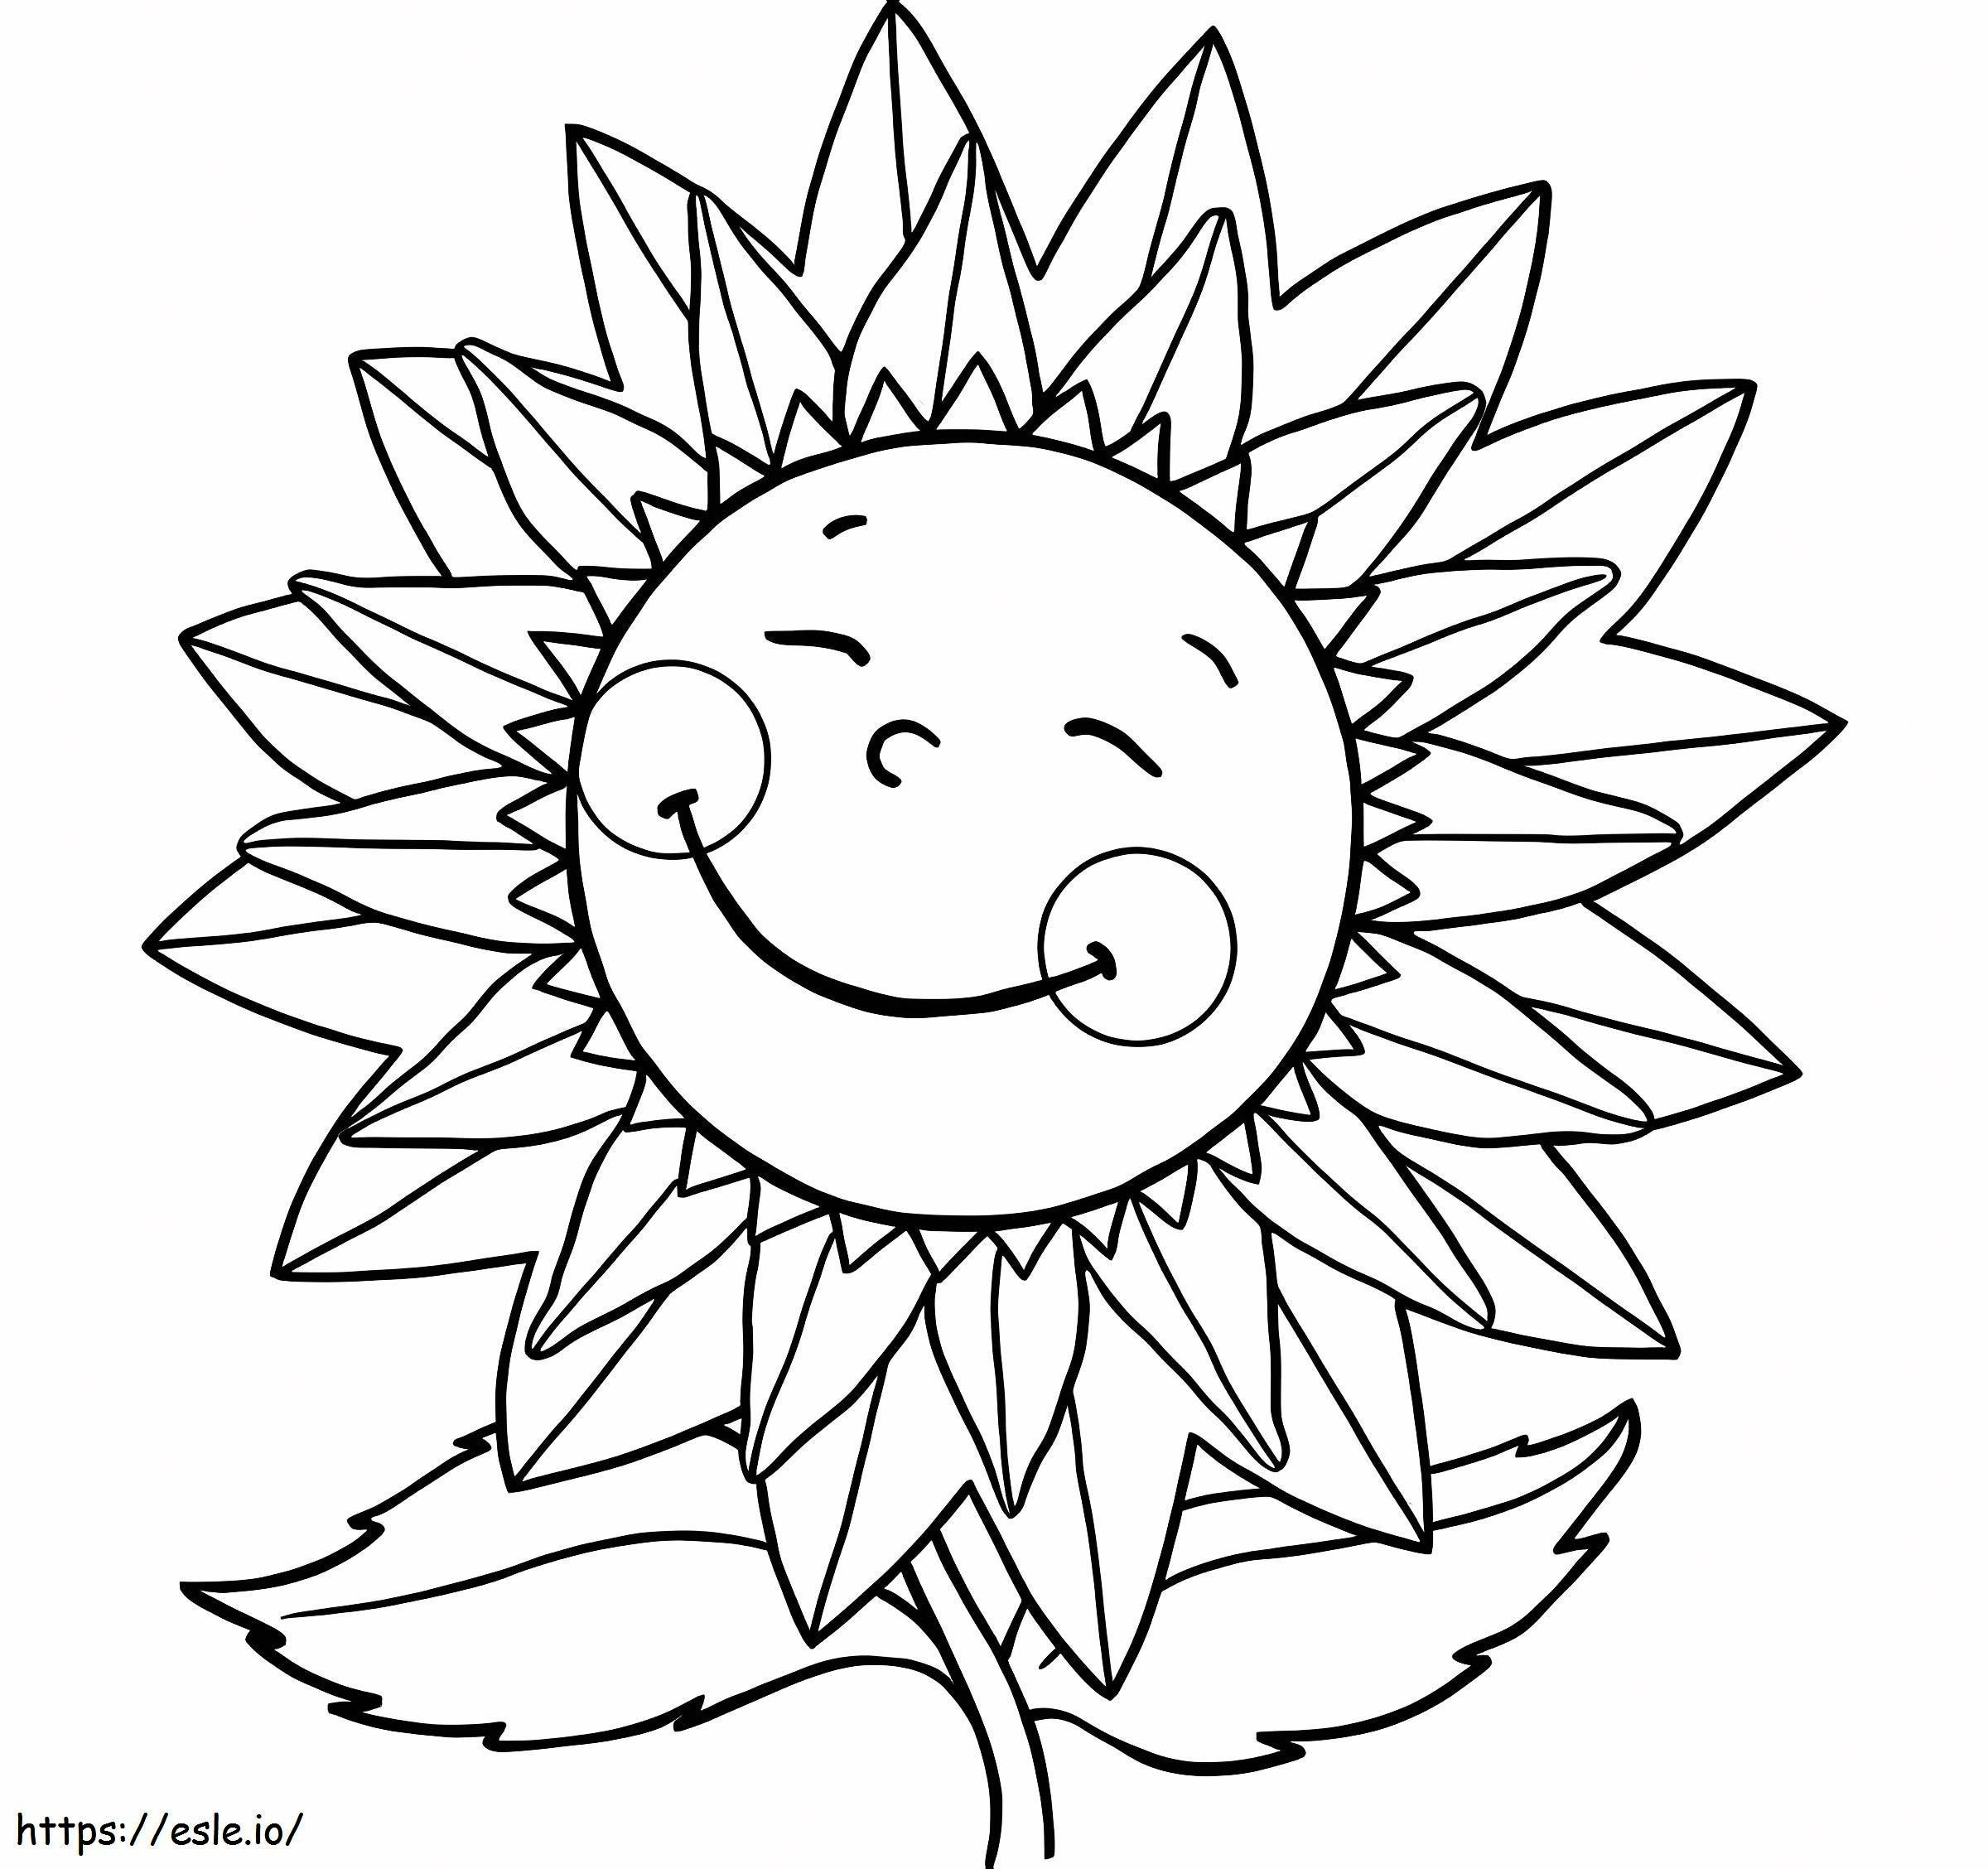 Cute Sunflower coloring page